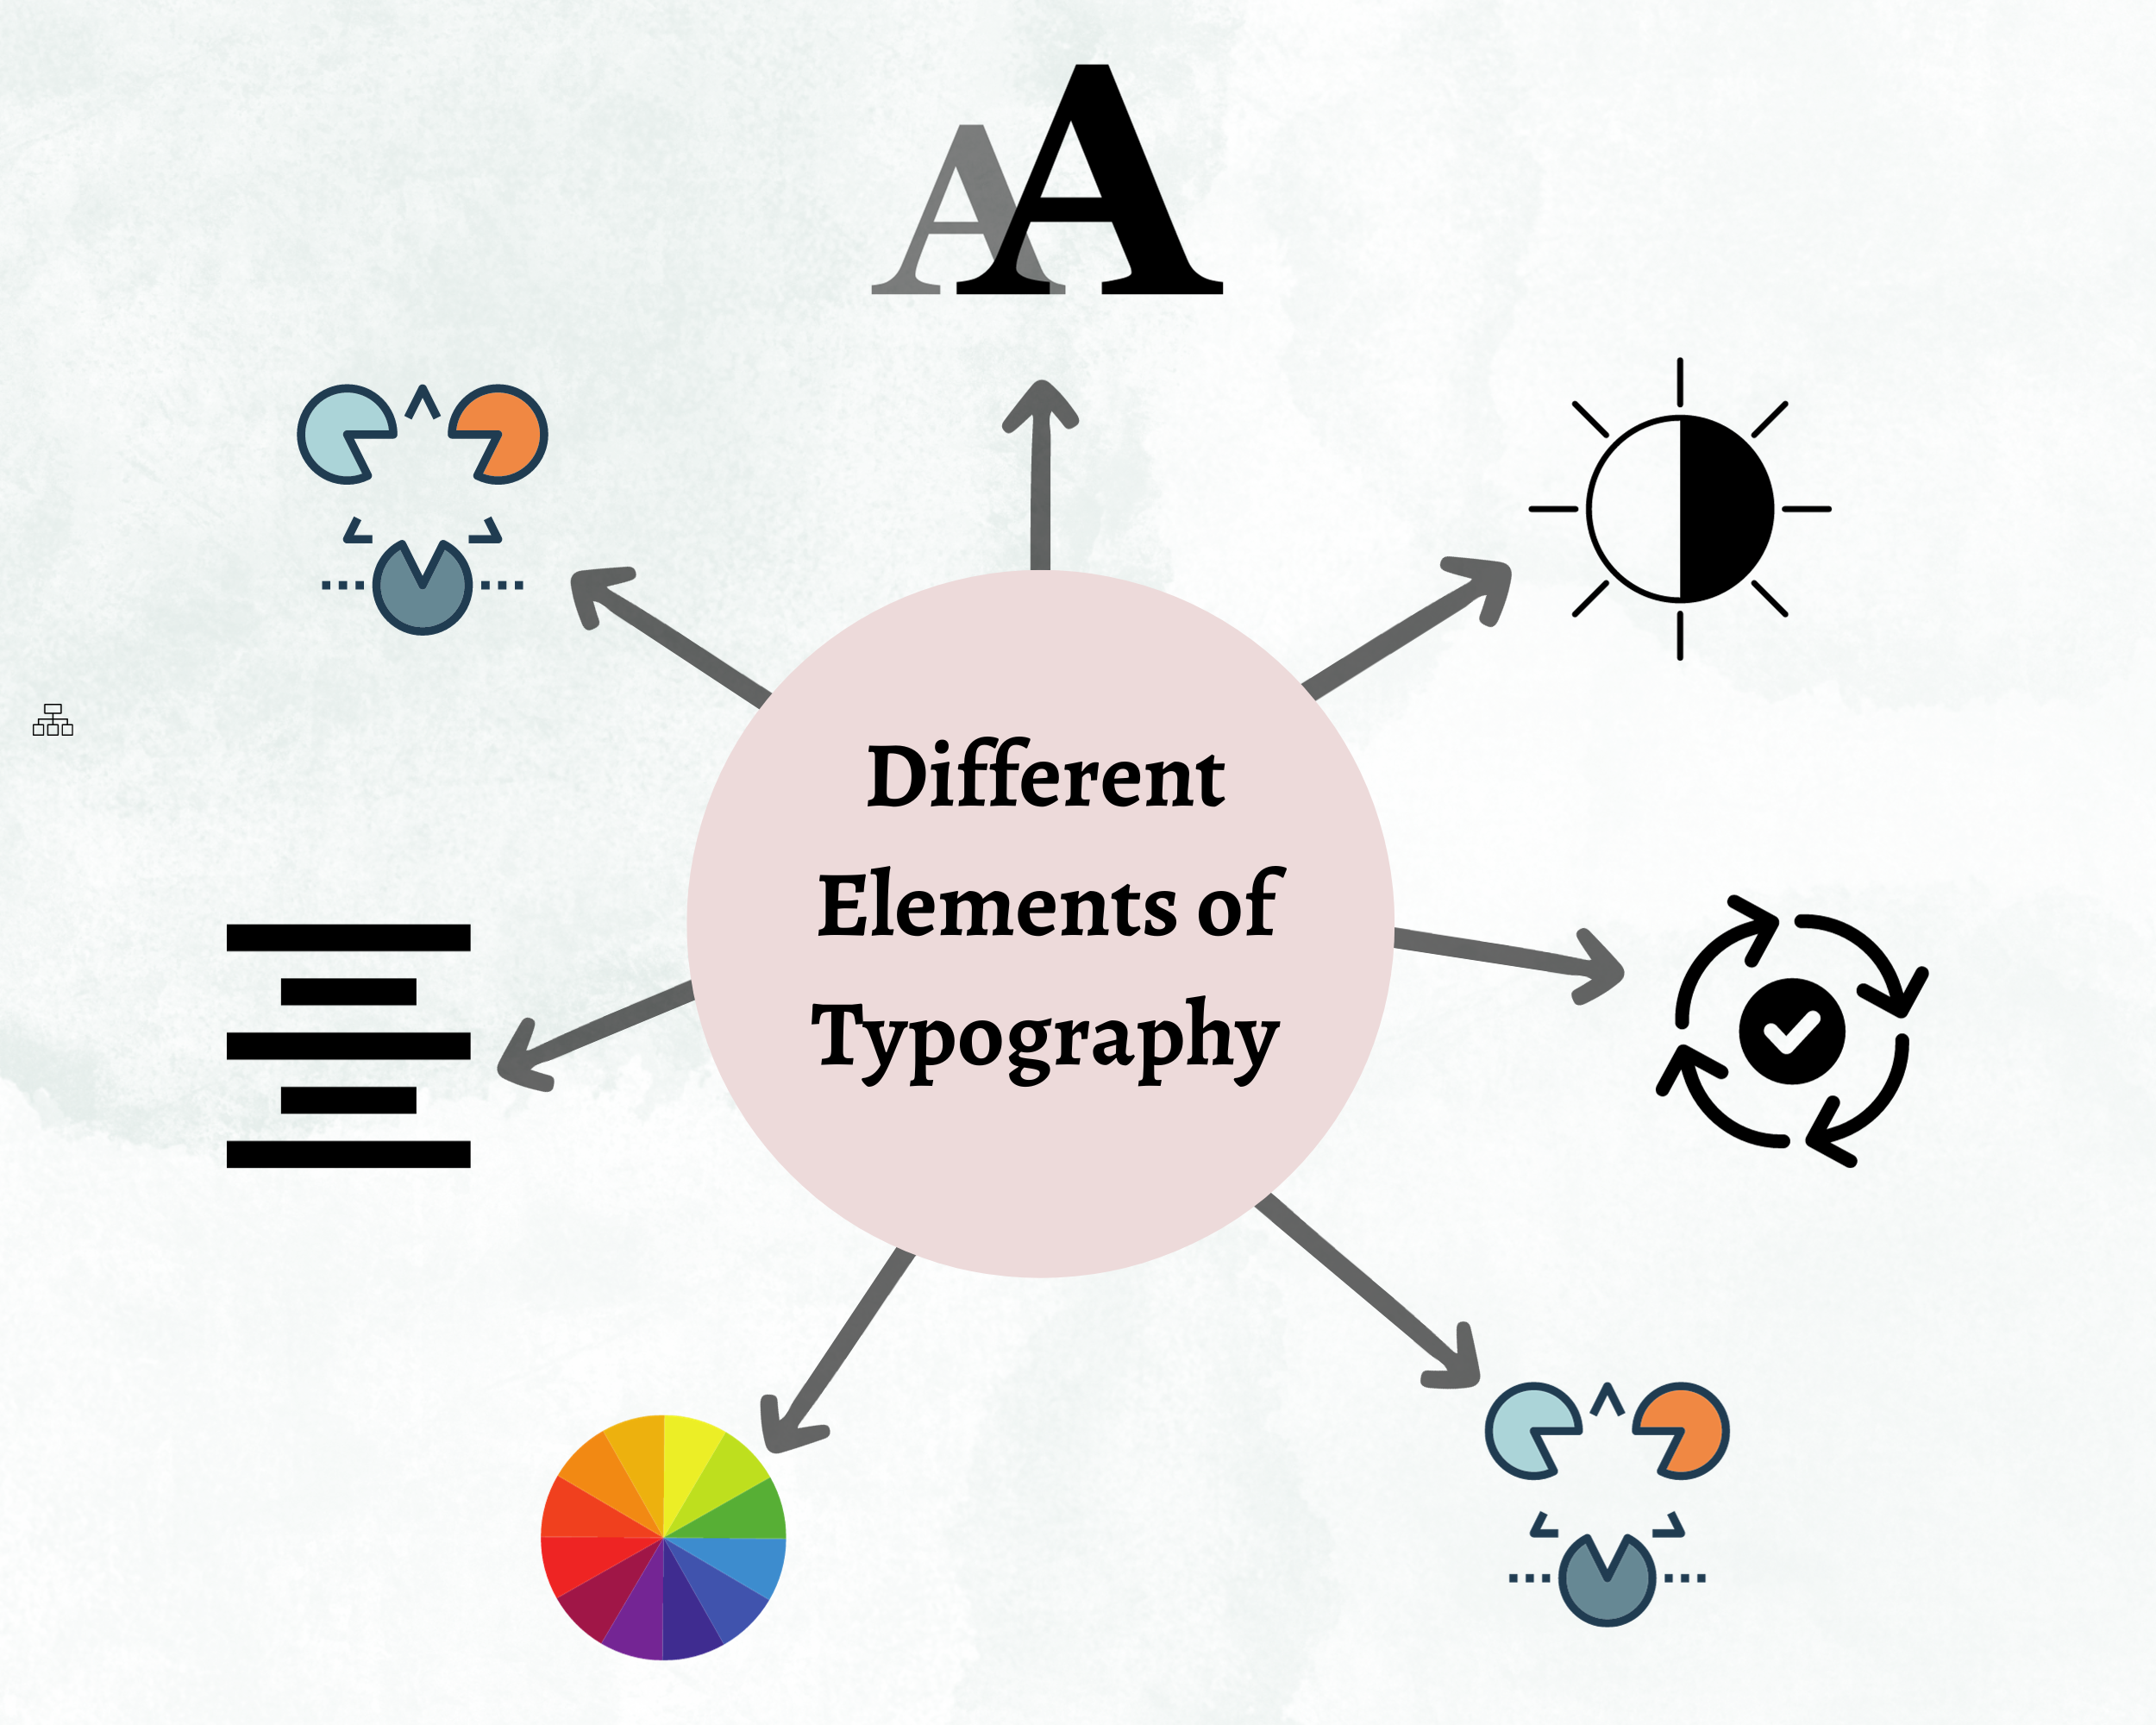 Different Elements of Typography